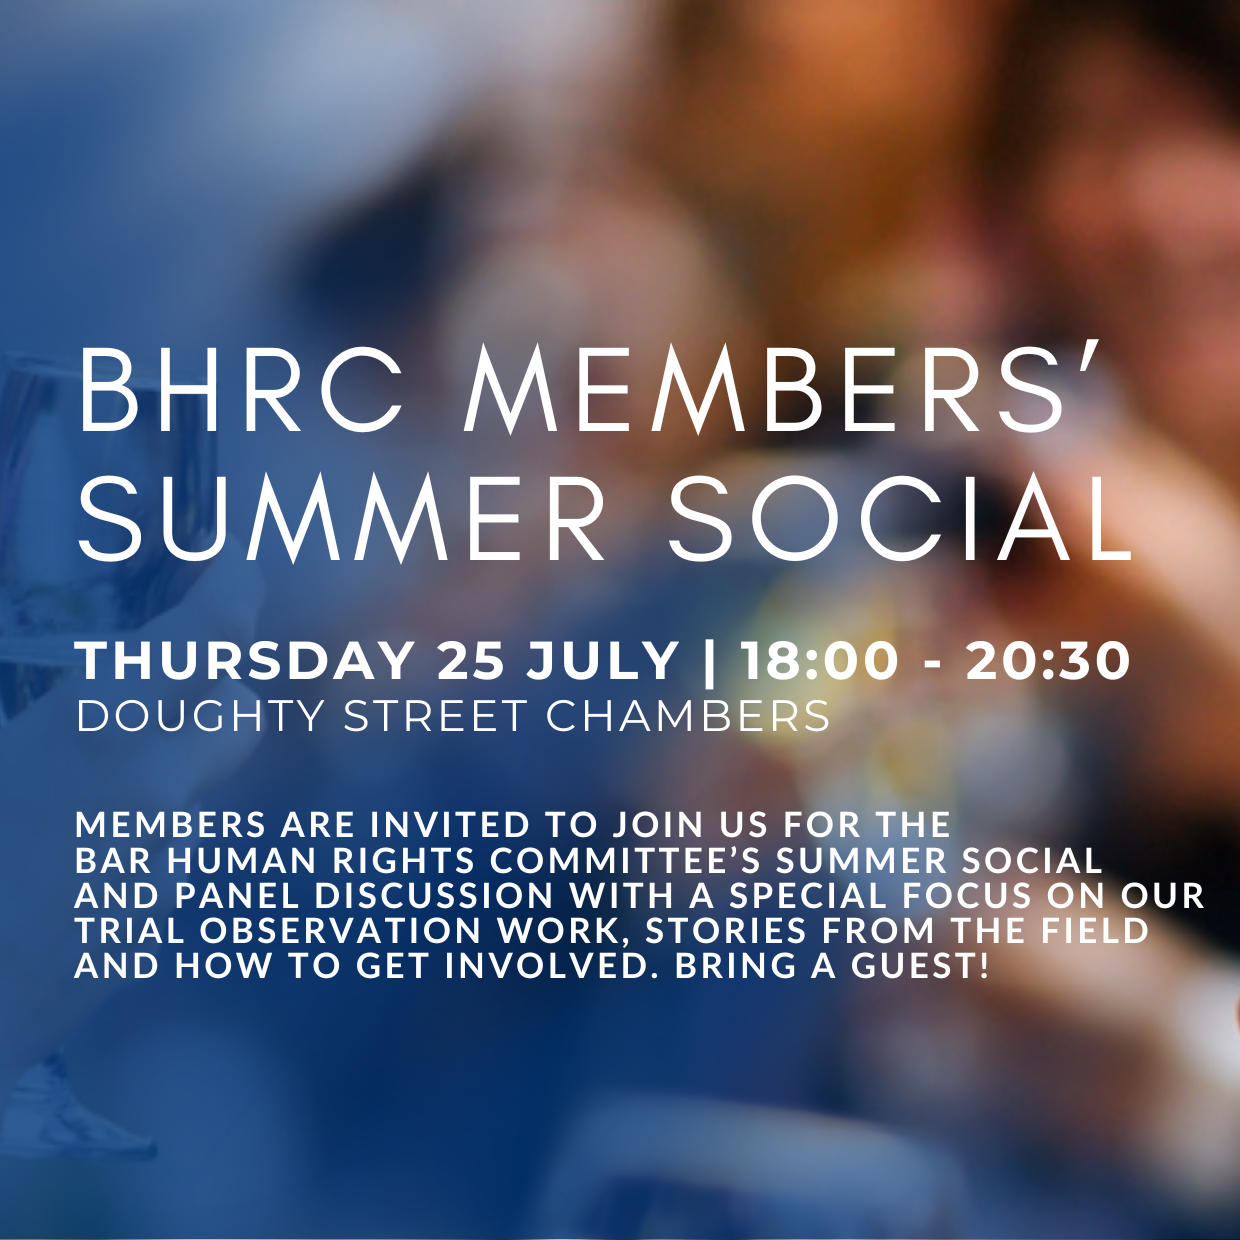 Join us for the BHRC Summer Social & Panel Discussion on our Trial Observation work